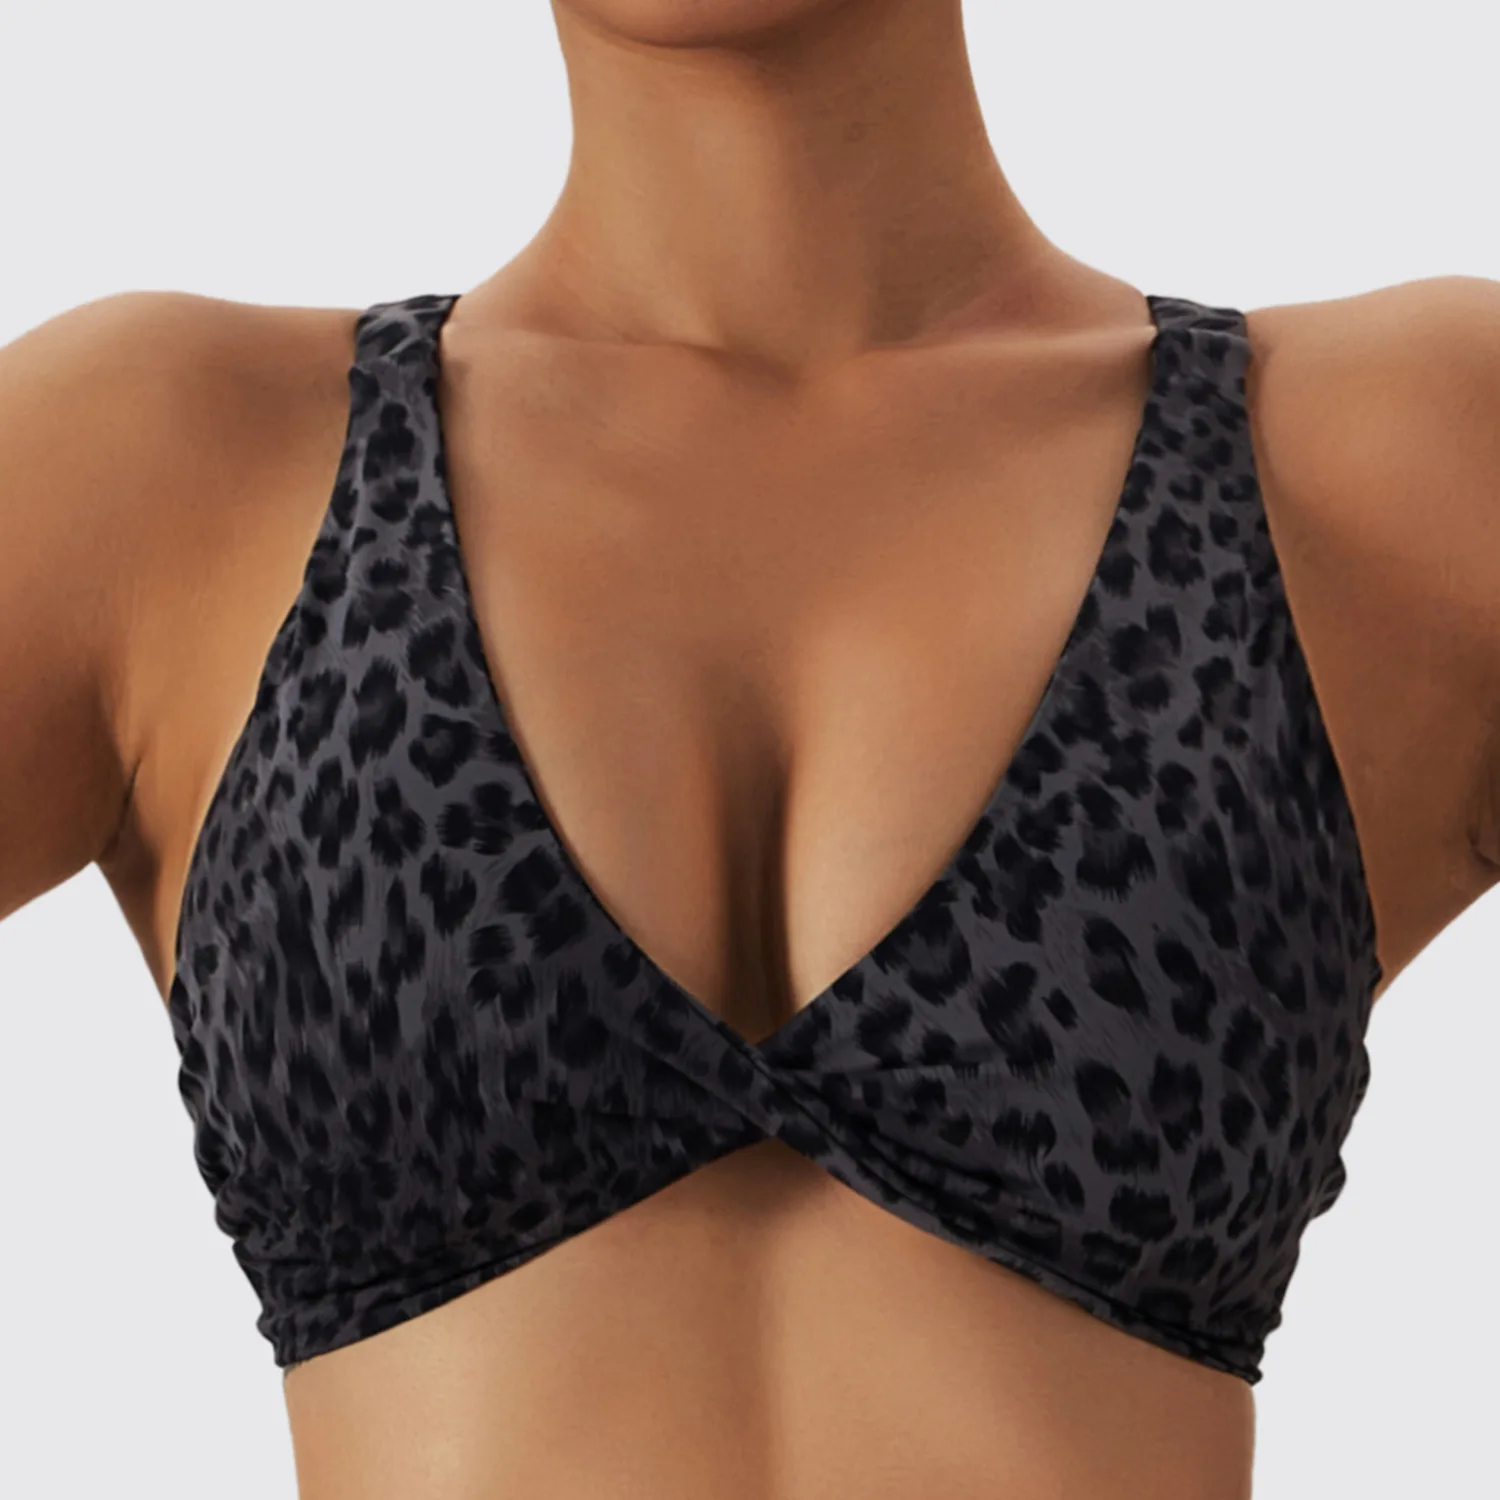 Sports bralette top - Black with leopard print silicone straps - Stylish  activewear bra top for yoga, pilates, spinning, and low-impact sports - LPRD